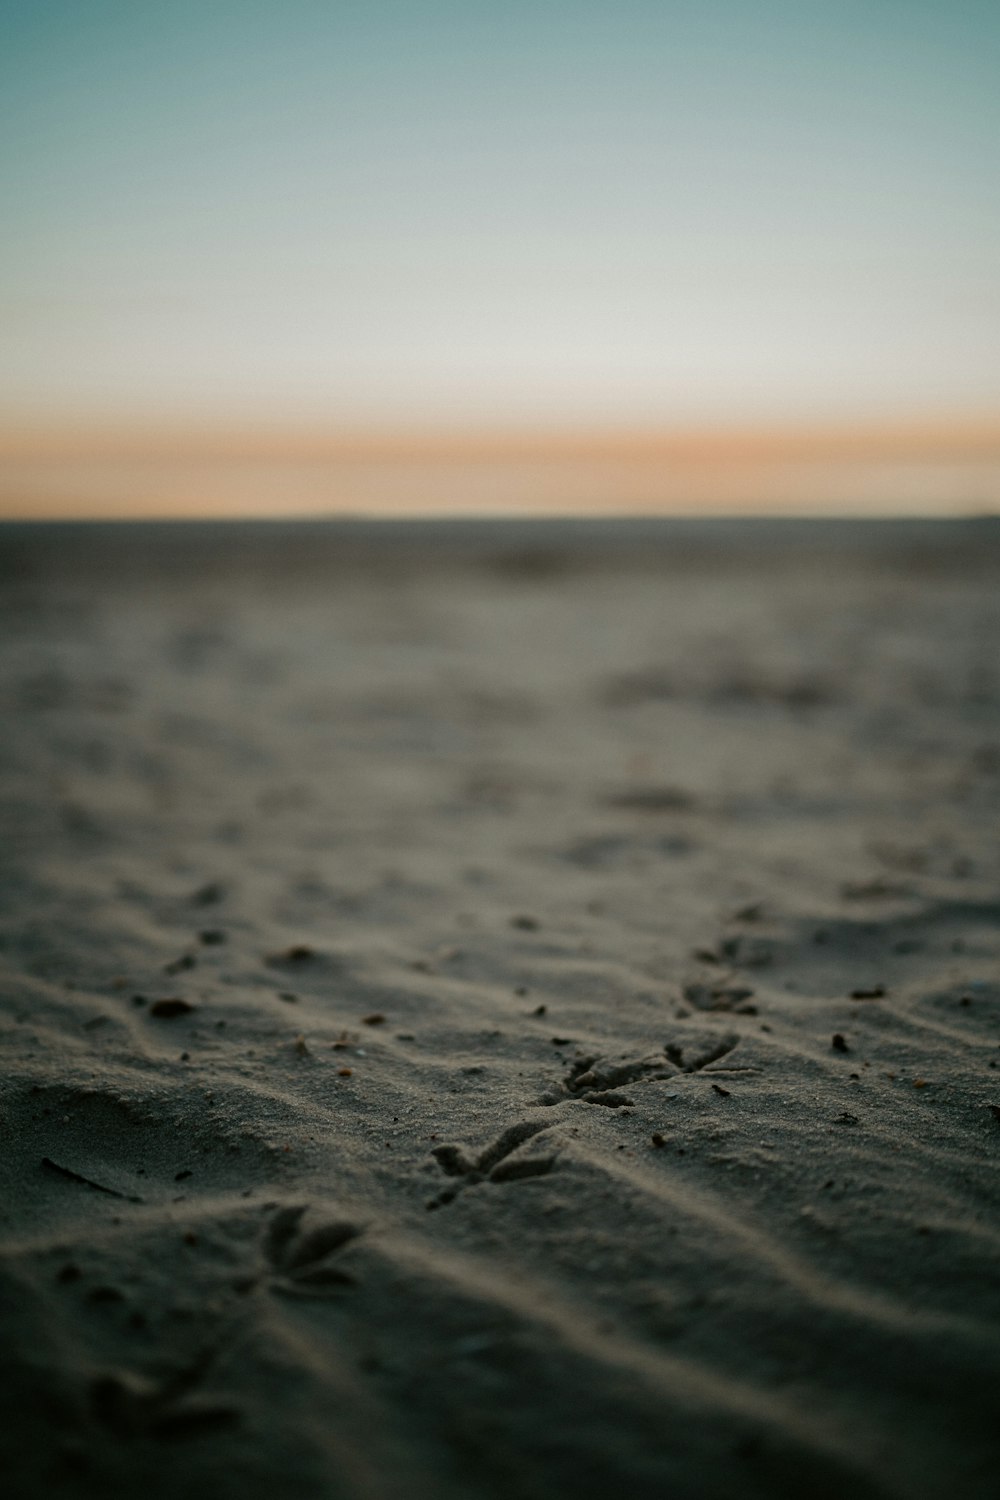 a blurry photo of a beach with footprints in the sand